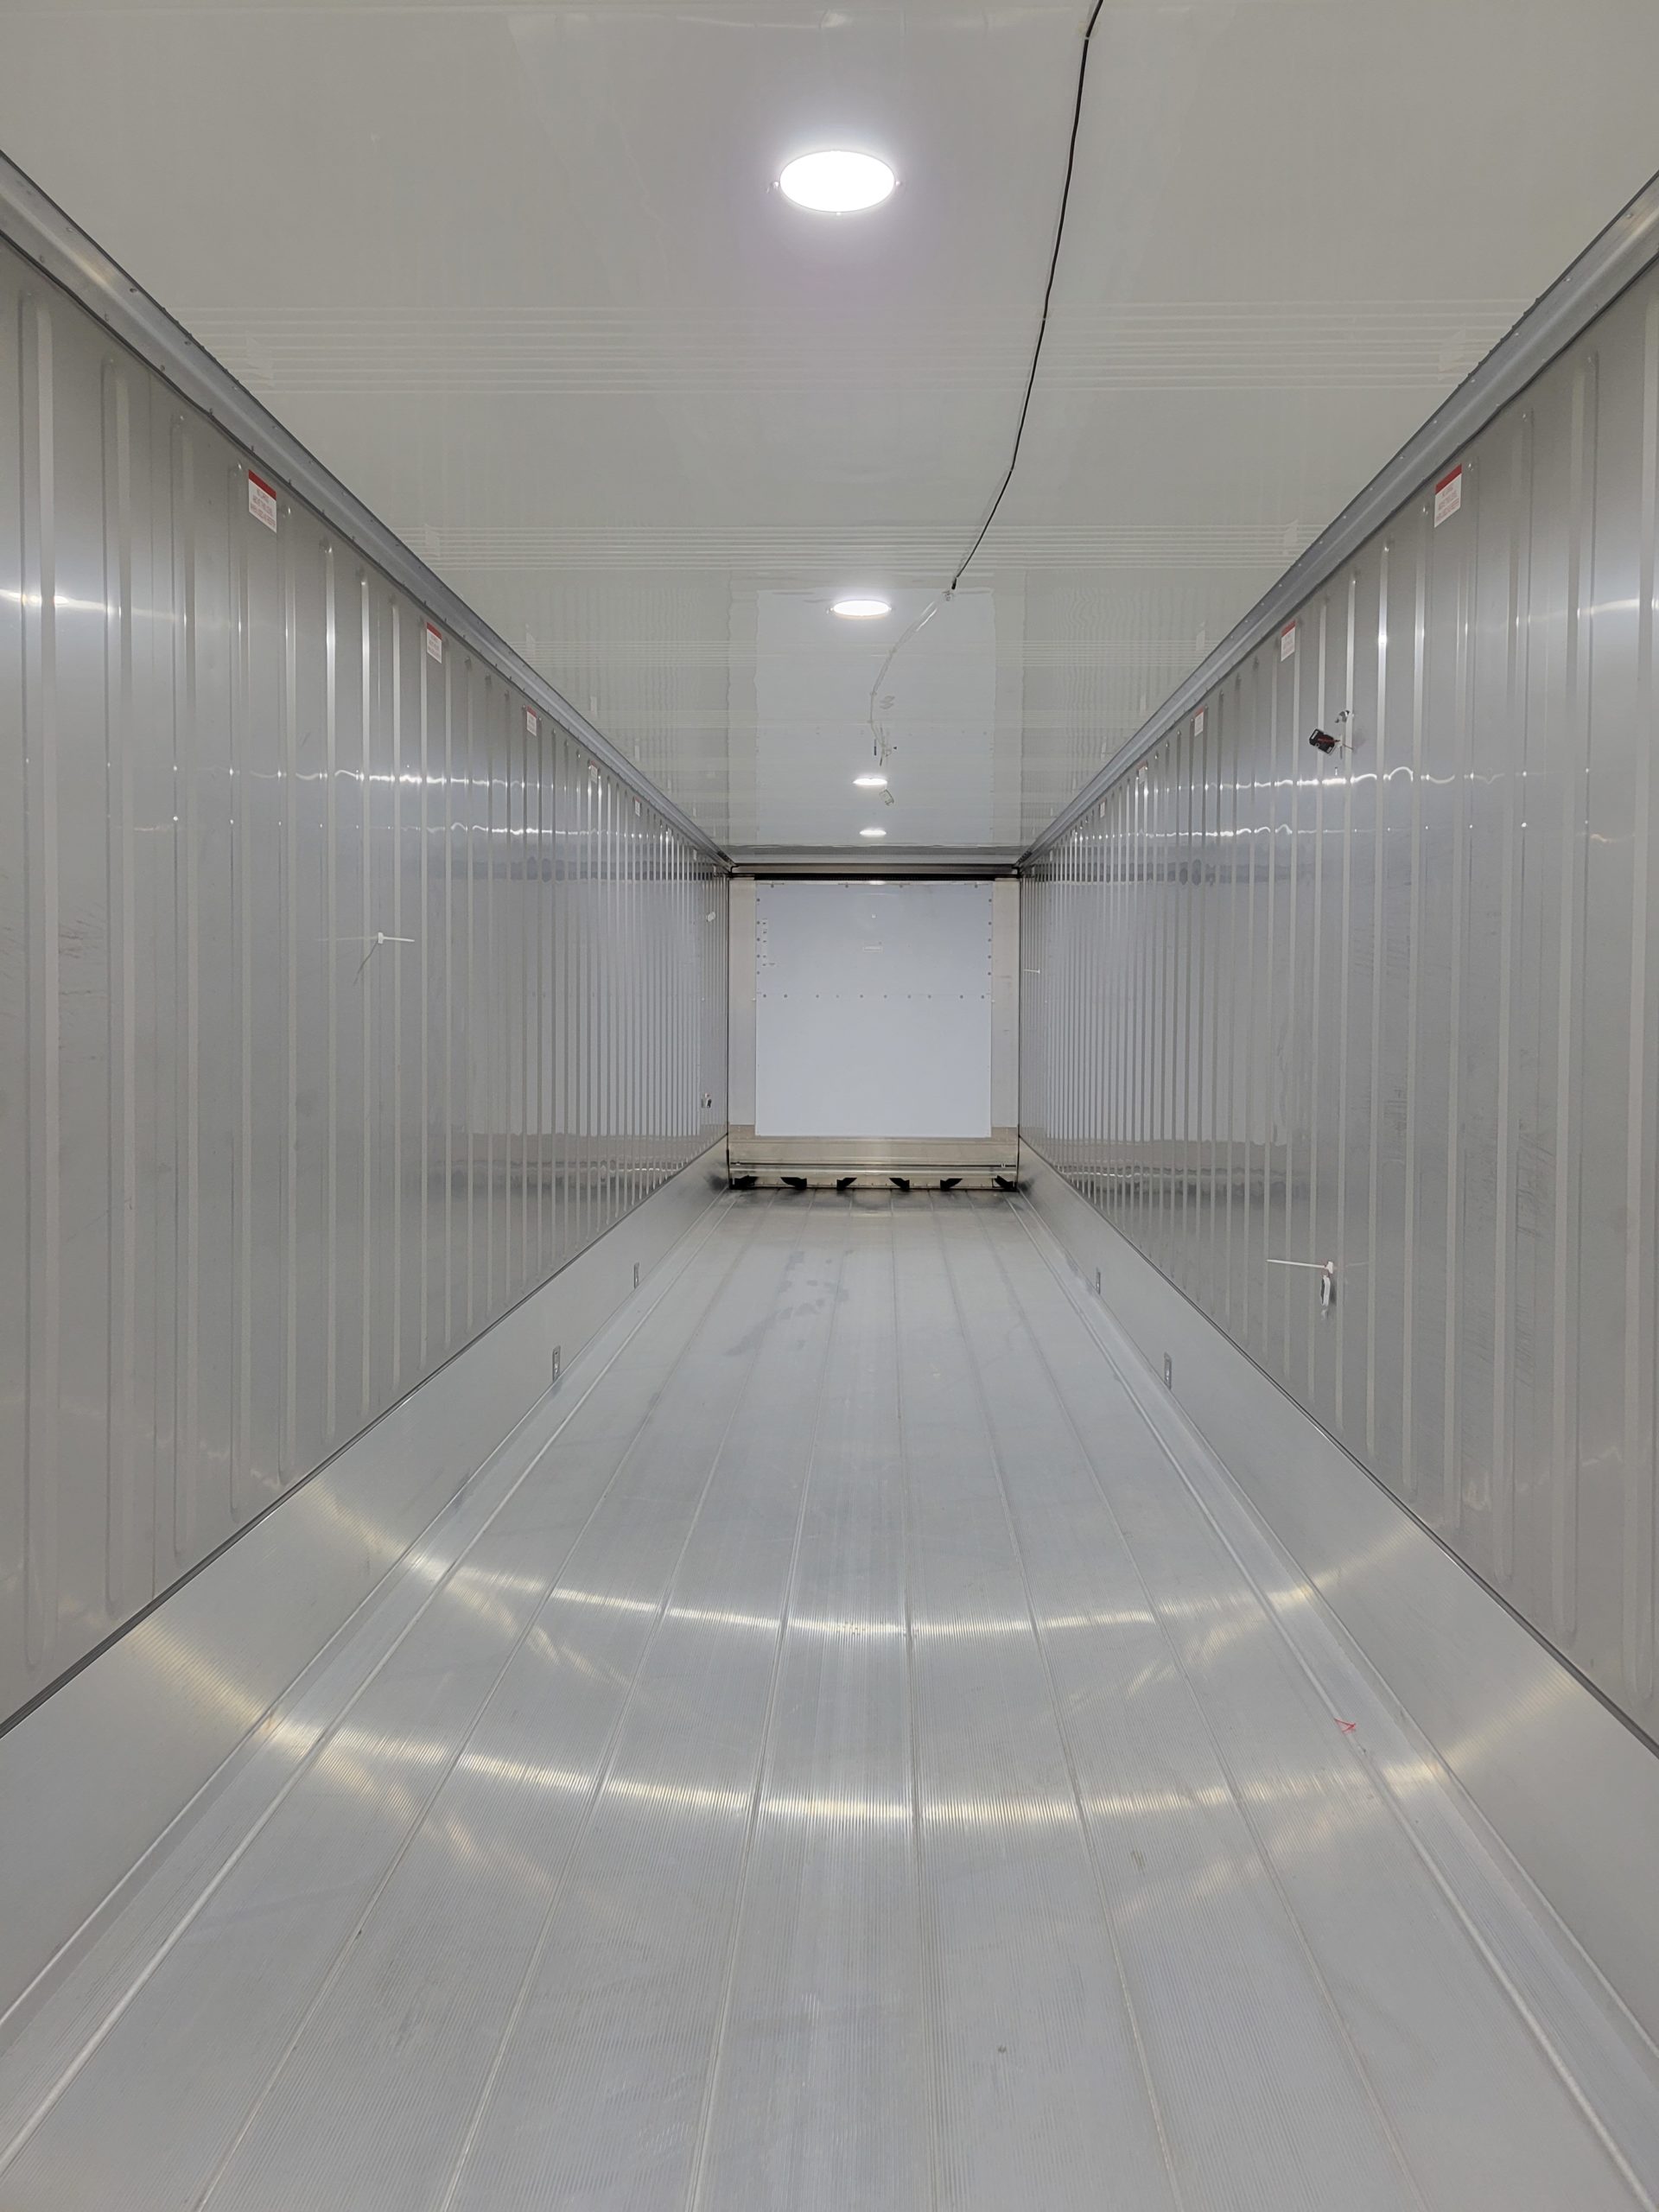 40' Refrigerated Storage Container